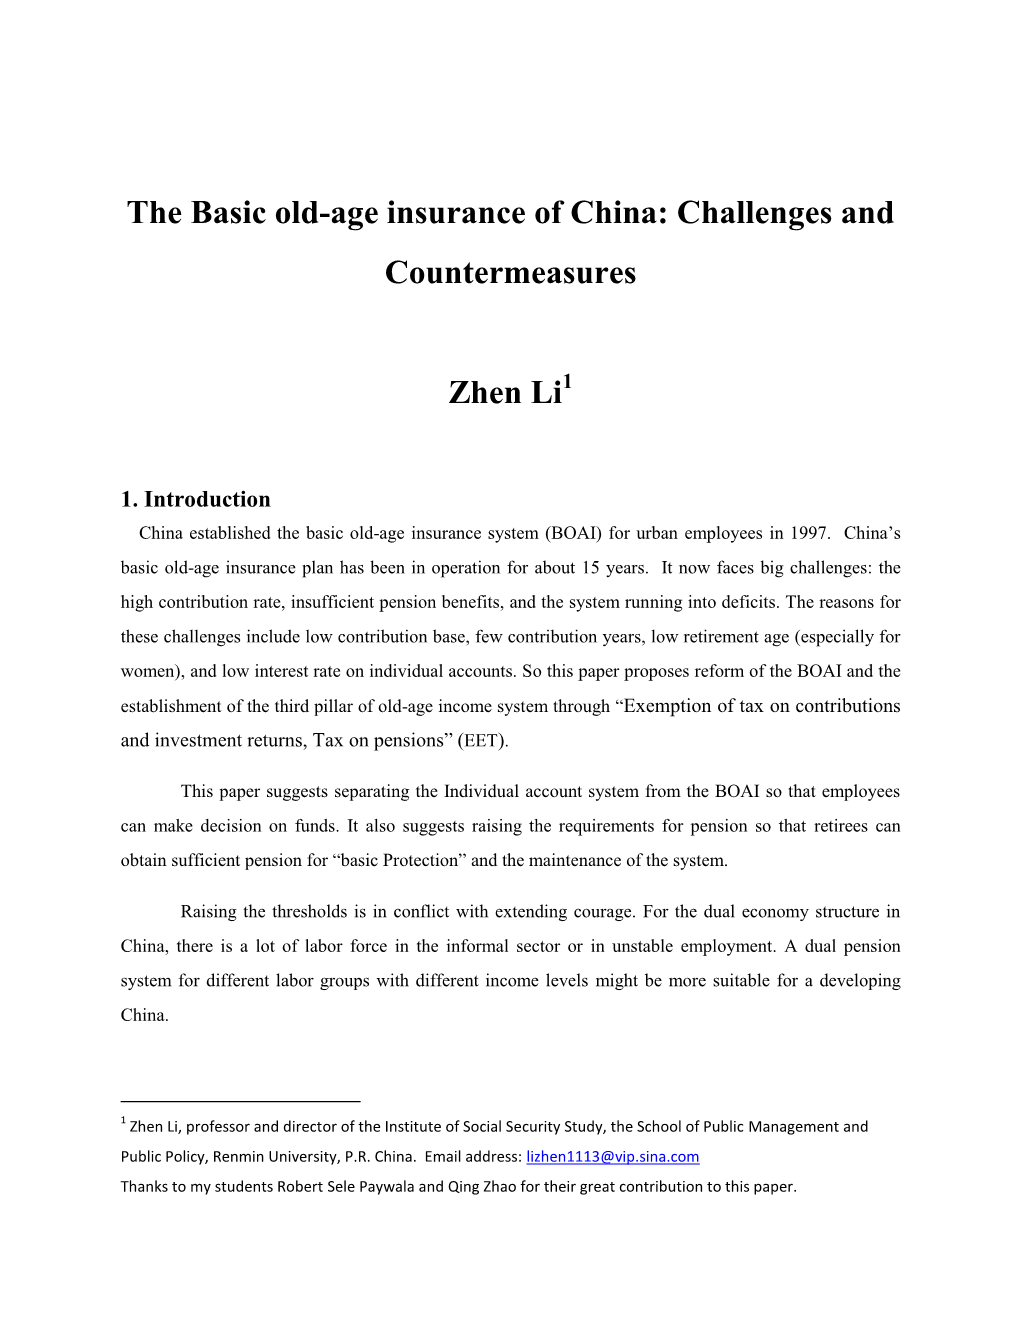 ZHEN Li. the Basic Old-Age Insurance of China Challenges And